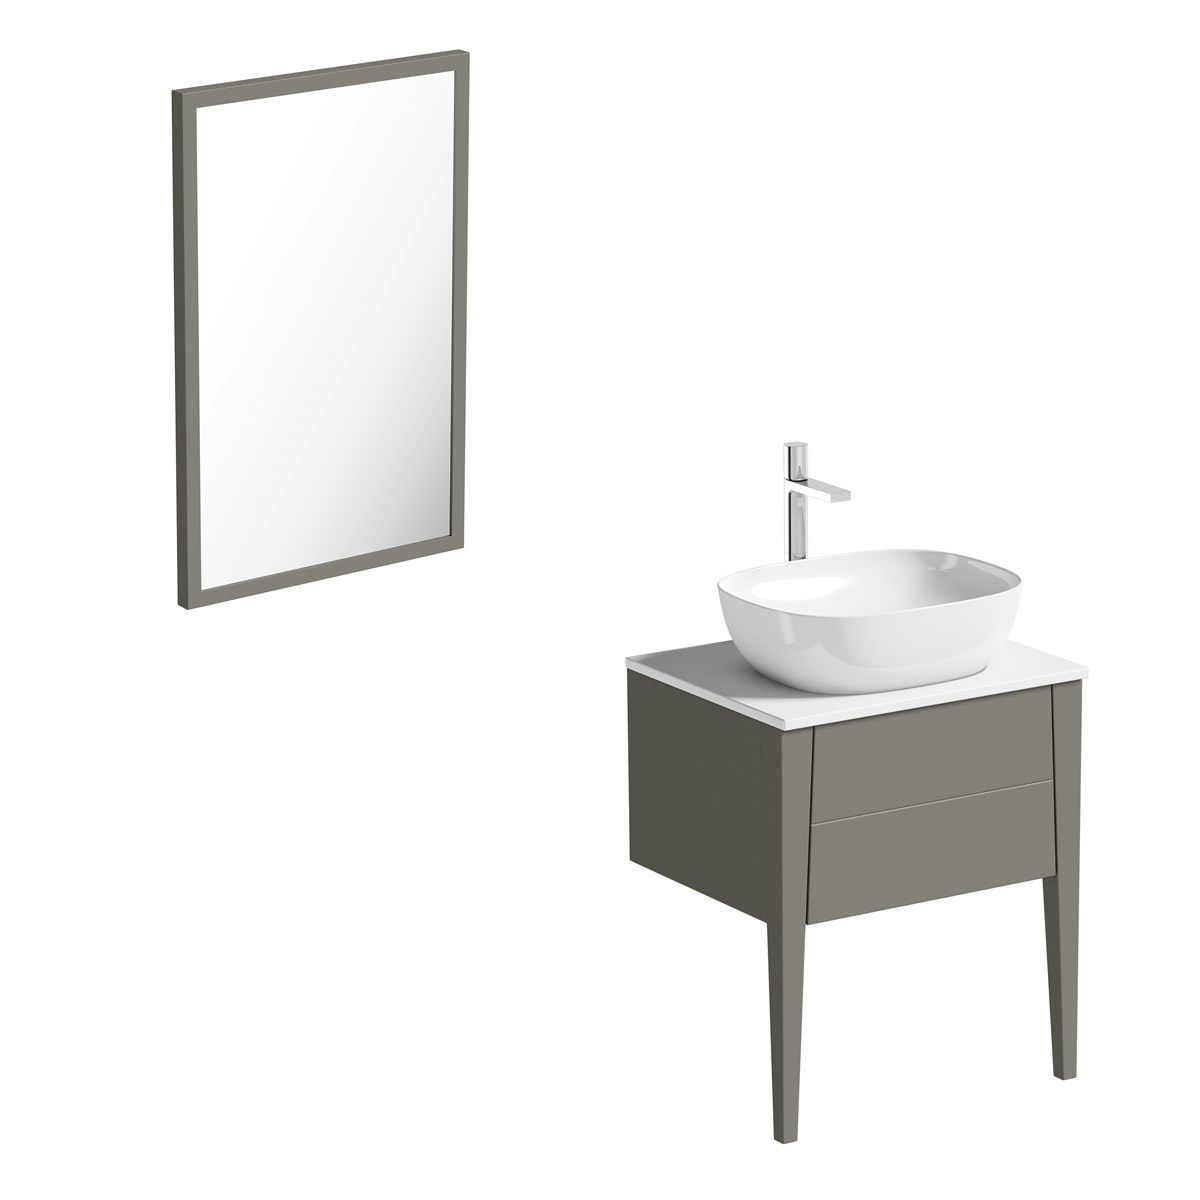 Mode Hale grey-stone matt wall hung vanity unit with ceramic countertop and basin 600mm with mirror